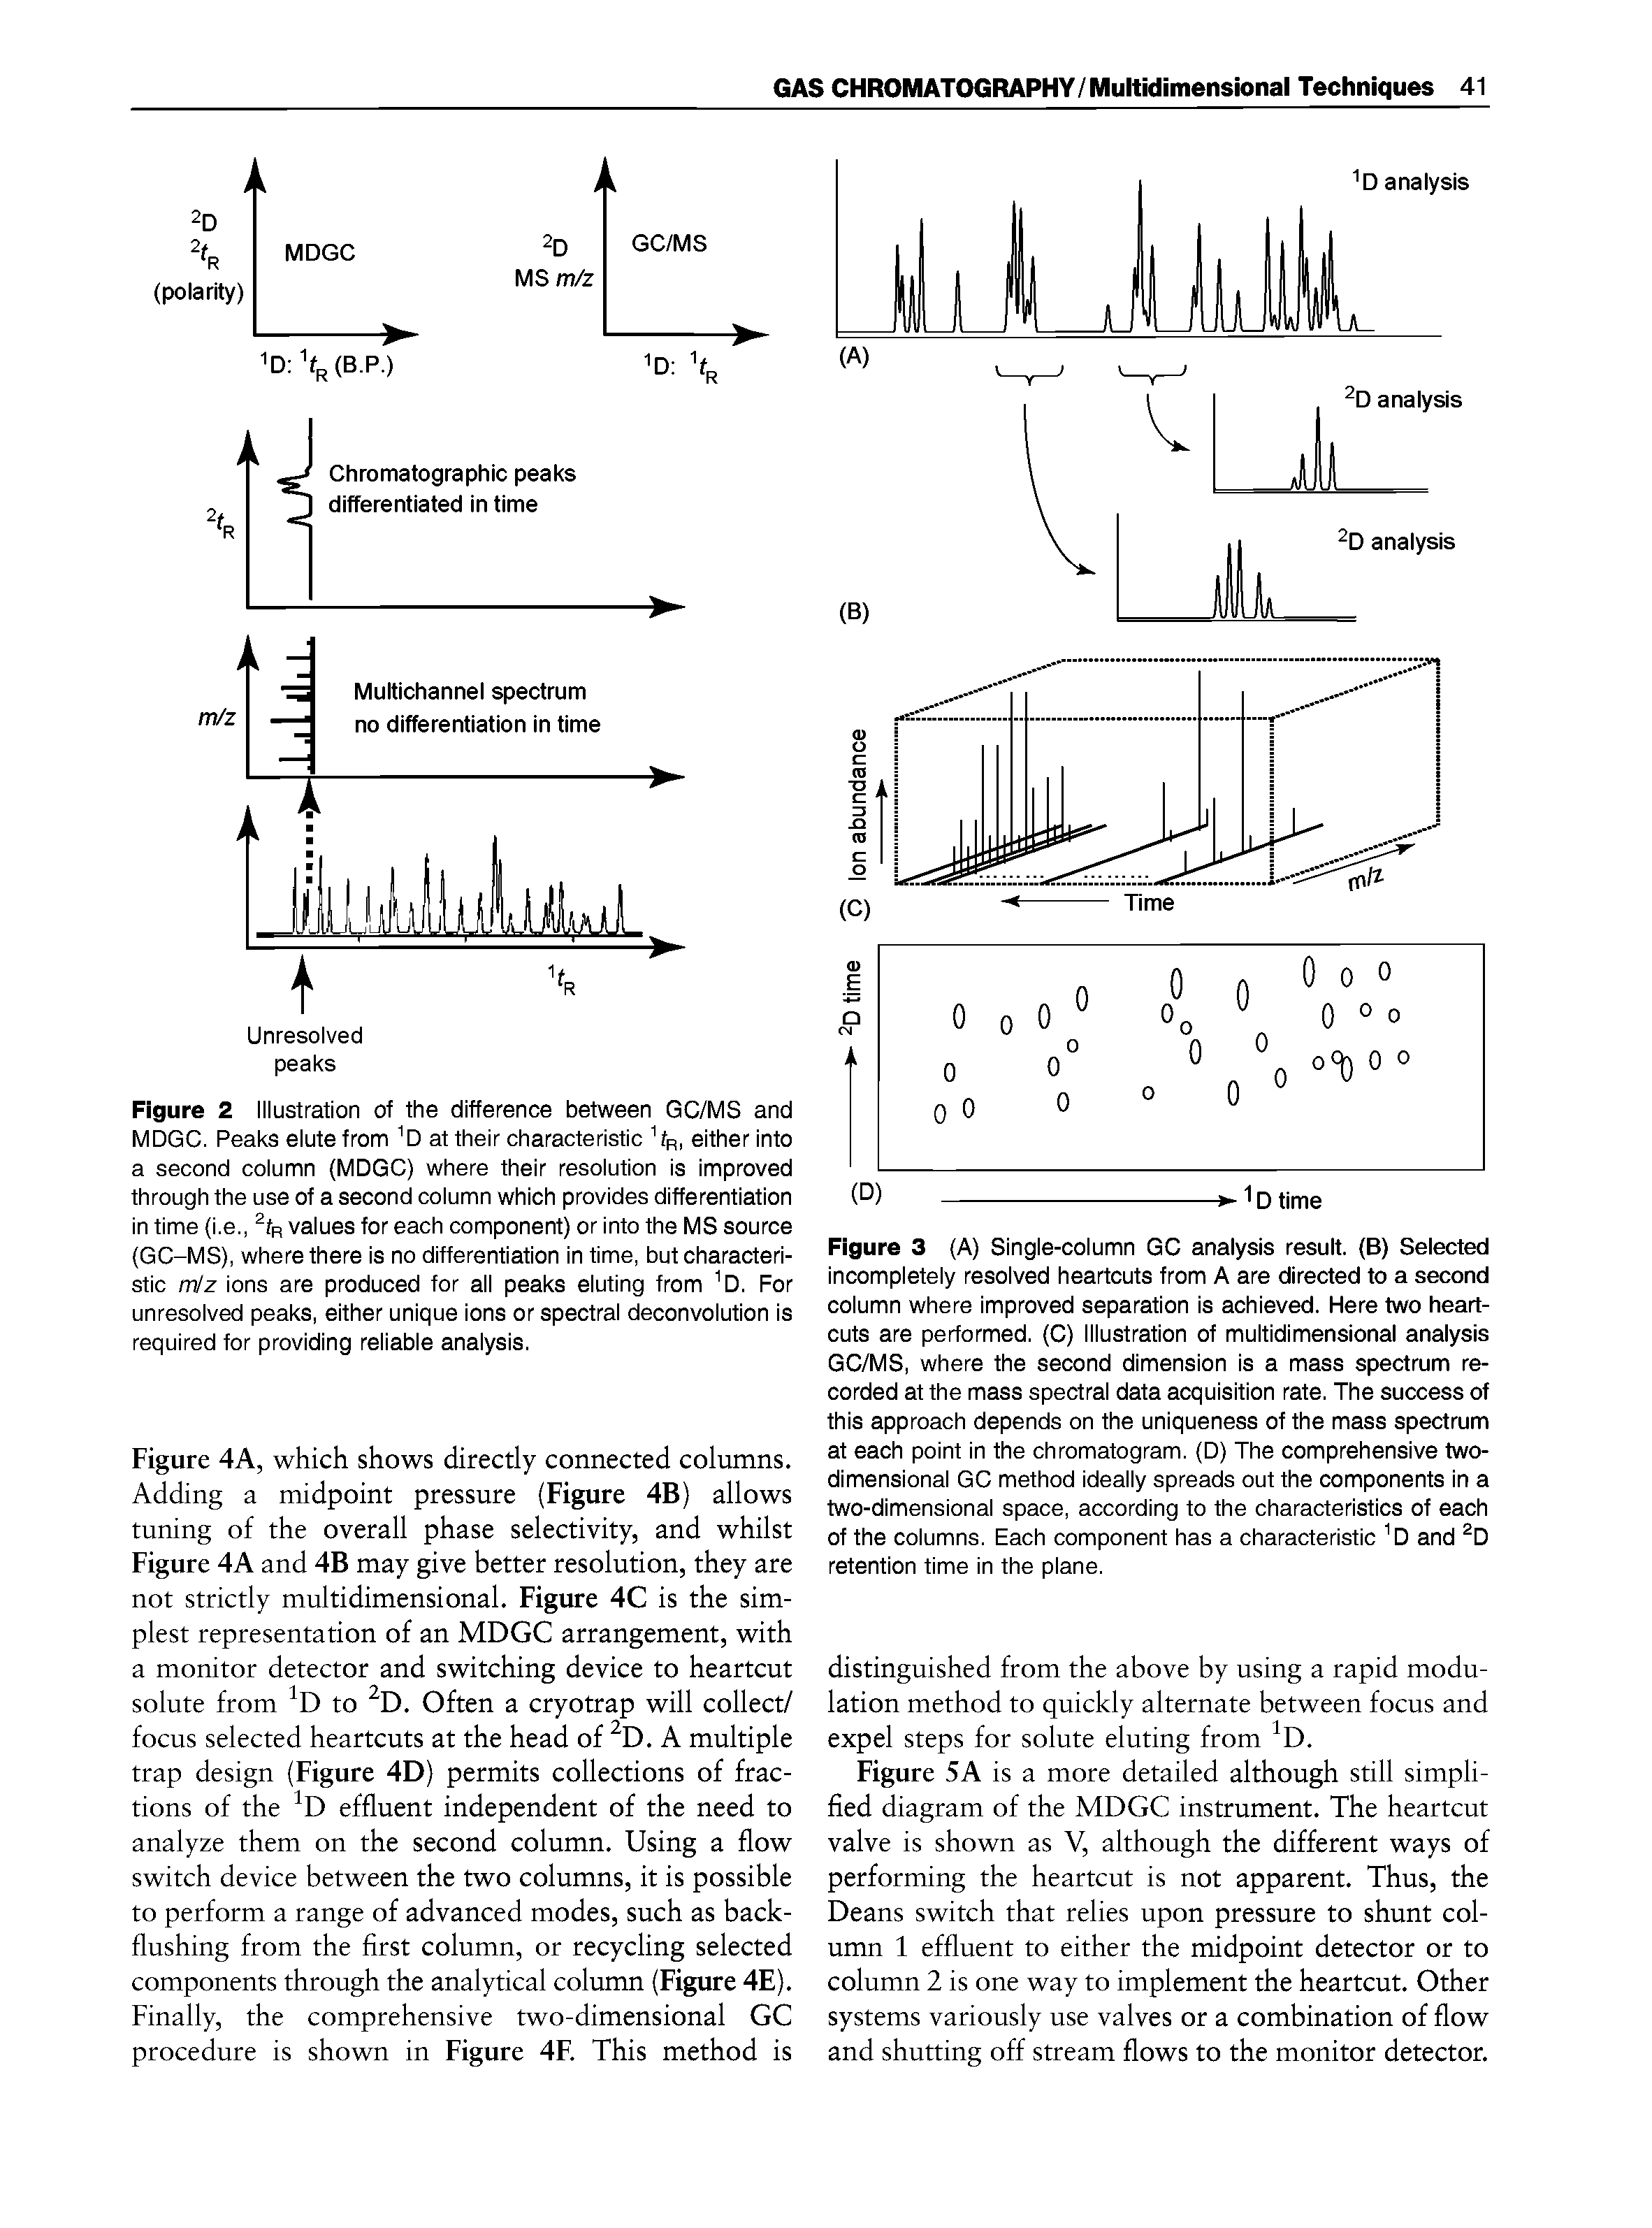 Figure 3 (A) Single-column GC analysis result. (B) Selected incompletely resolved heartcuts from A are directed to a second column where improved separation is achieved. Here two heart-cuts are performed. (C) Illustration of multidimensional analysis GC/MS, where the second dimension is a mass spectrum recorded at the mass spectral data acquisition rate. The success of this approach depends on the uniqueness of the mass spectrum at each point in the chromatogram. (D) The comprehensive two-dimensional GC method ideally spreads out the components in a two-dimensional space, according to the characteristics of each of the columns. Each component has a characteristic D and D retention time in the plane.